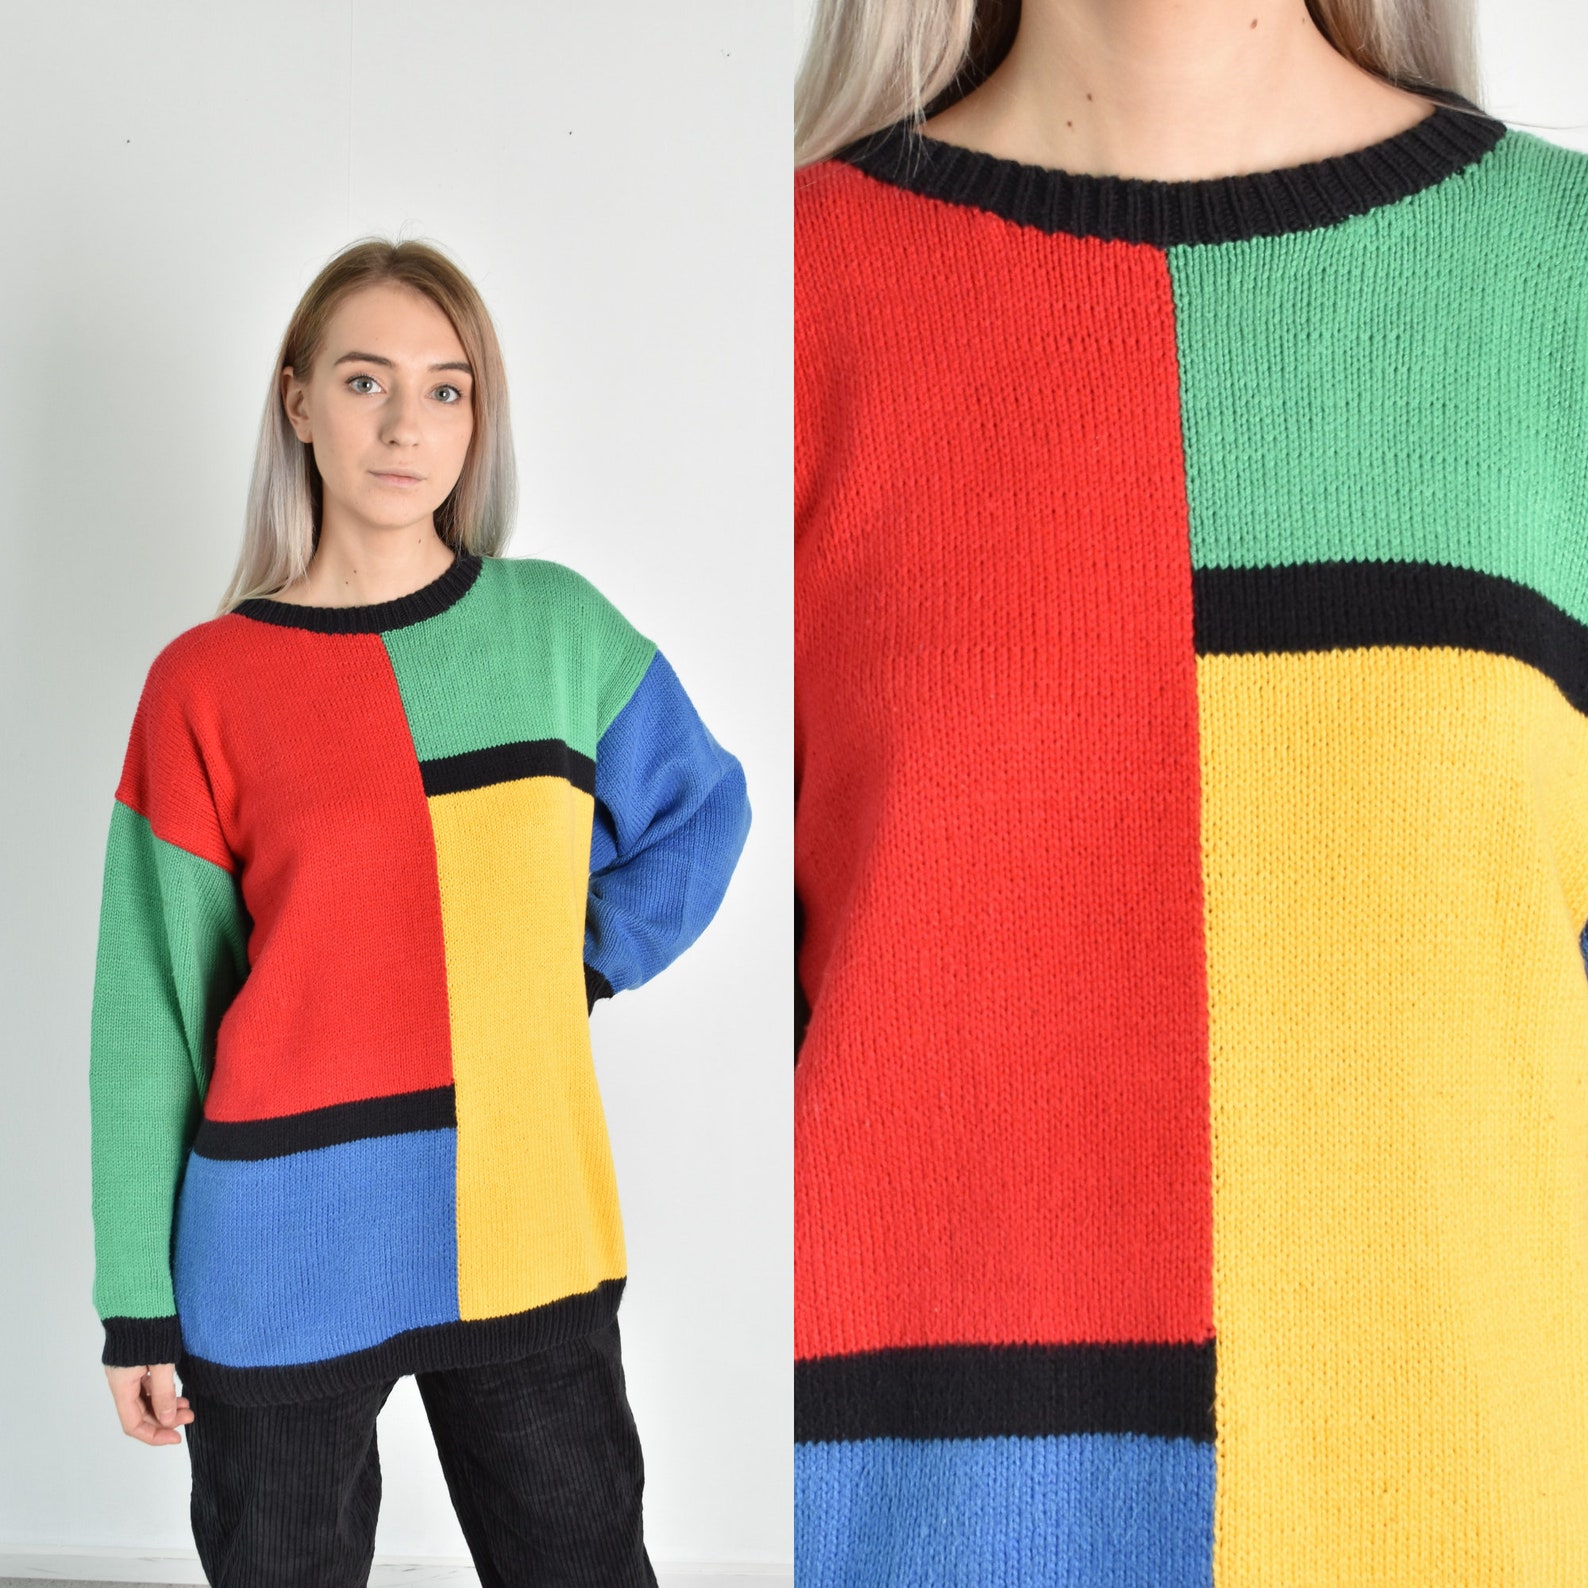 Vintage 90s Colorful Red Green Blue Yellow Knit Jumper | Etsy